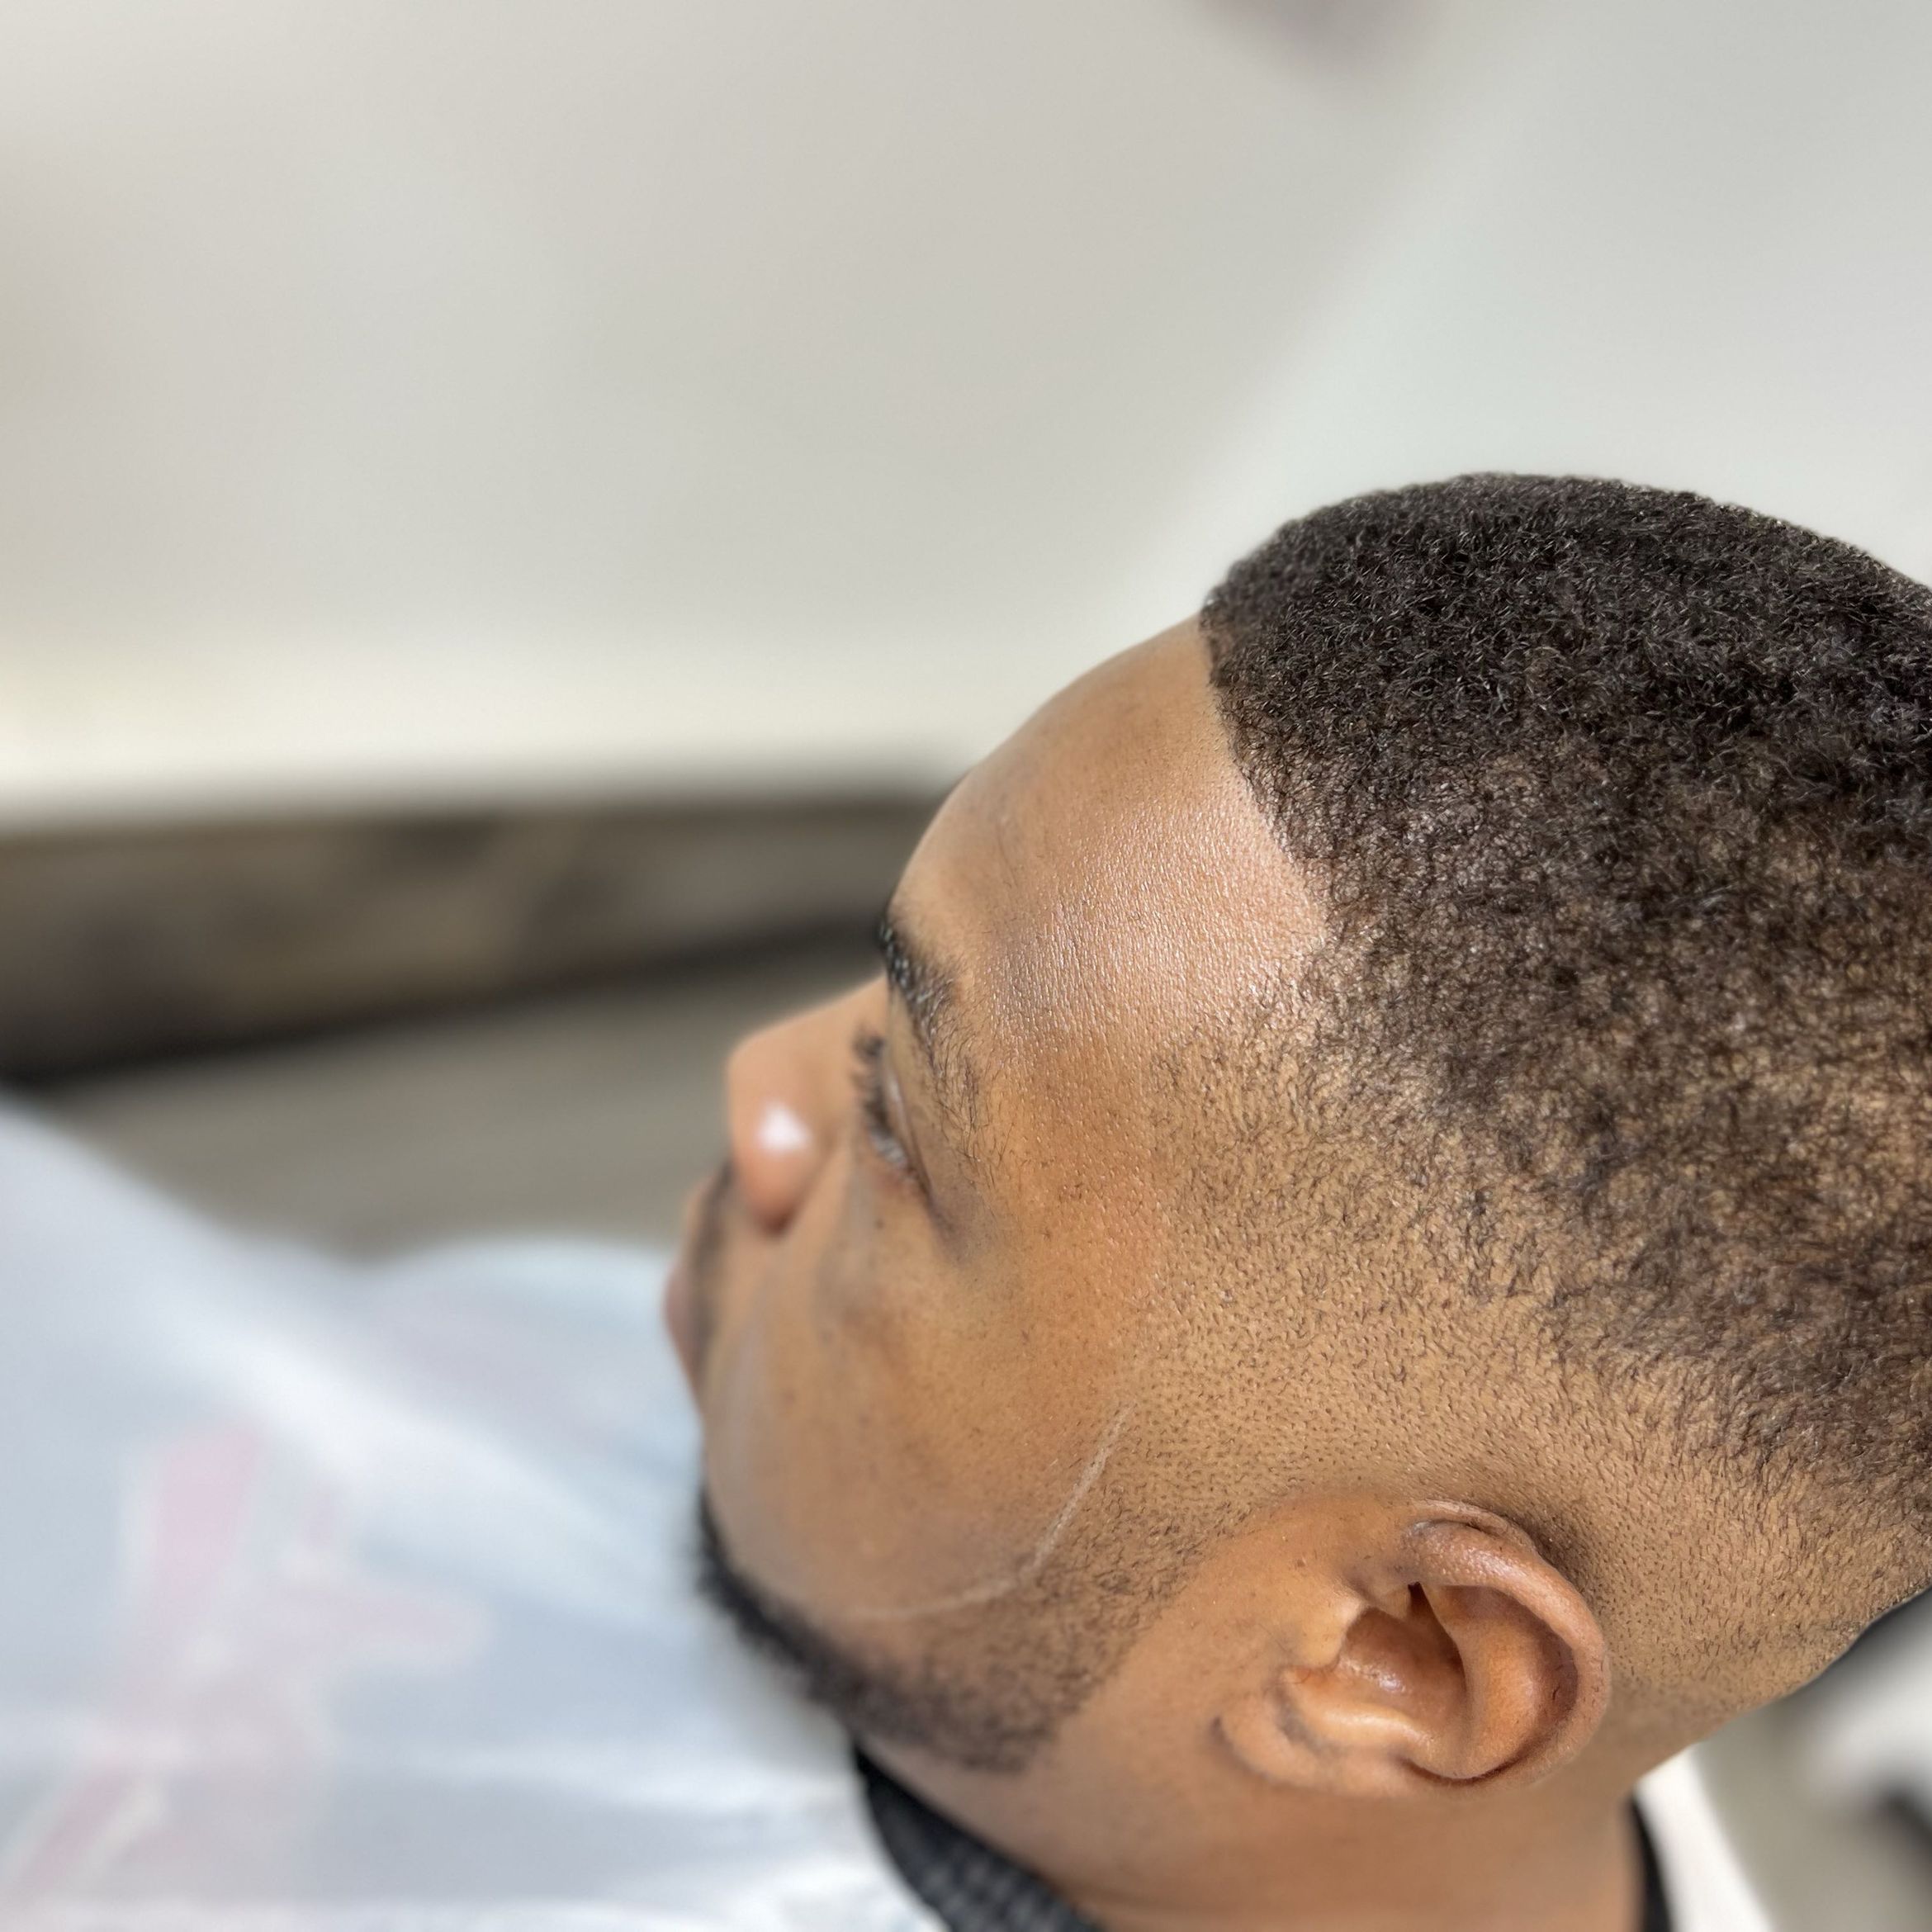 Adult haircuts start 19 & up $30 with the Beard portfolio